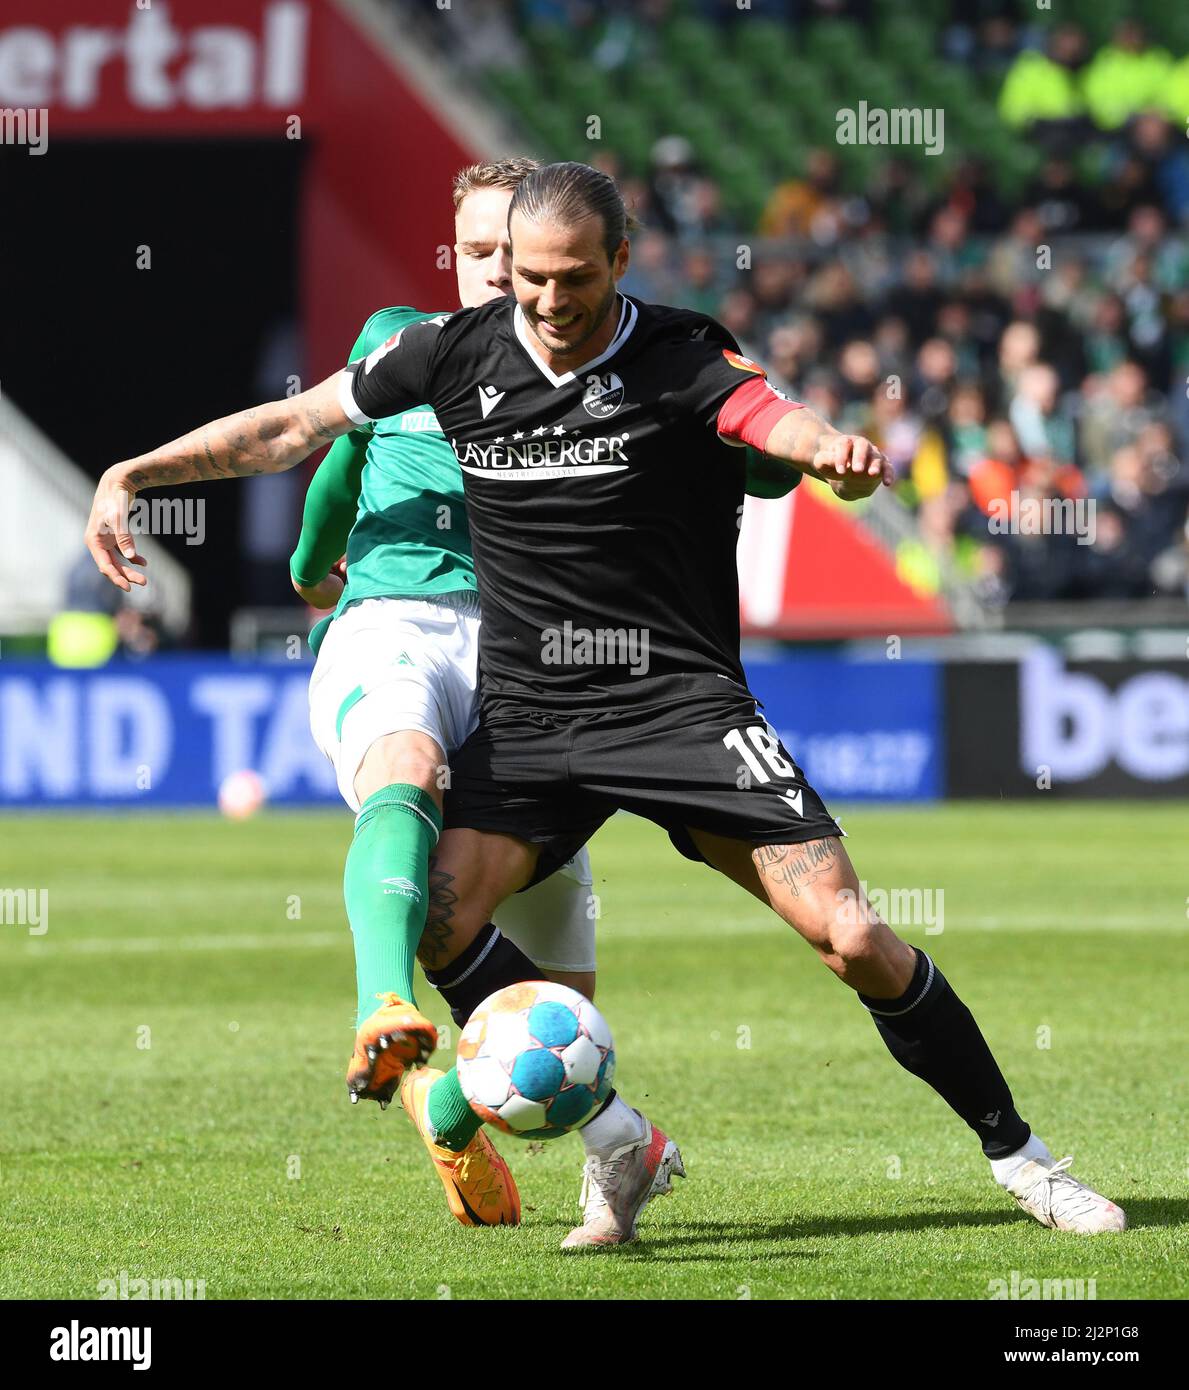 Bremen, Germany. 03rd Apr, 2022. Soccer: 2nd Bundesliga, Werder Bremen - SV Sandhausen, Matchday 28, wohninvest Weserstadion. Werder's Niklas Schmidt (l) fights for the ball against Sandhausen's Dennis Diekmeier. Credit: Carmen Jaspersen/dpa - IMPORTANT NOTE: In accordance with the requirements of the DFL Deutsche Fußball Liga and the DFB Deutscher Fußball-Bund, it is prohibited to use or have used photographs taken in the stadium and/or of the match in the form of sequence pictures and/or video-like photo series./dpa/Alamy Live News Stock Photo